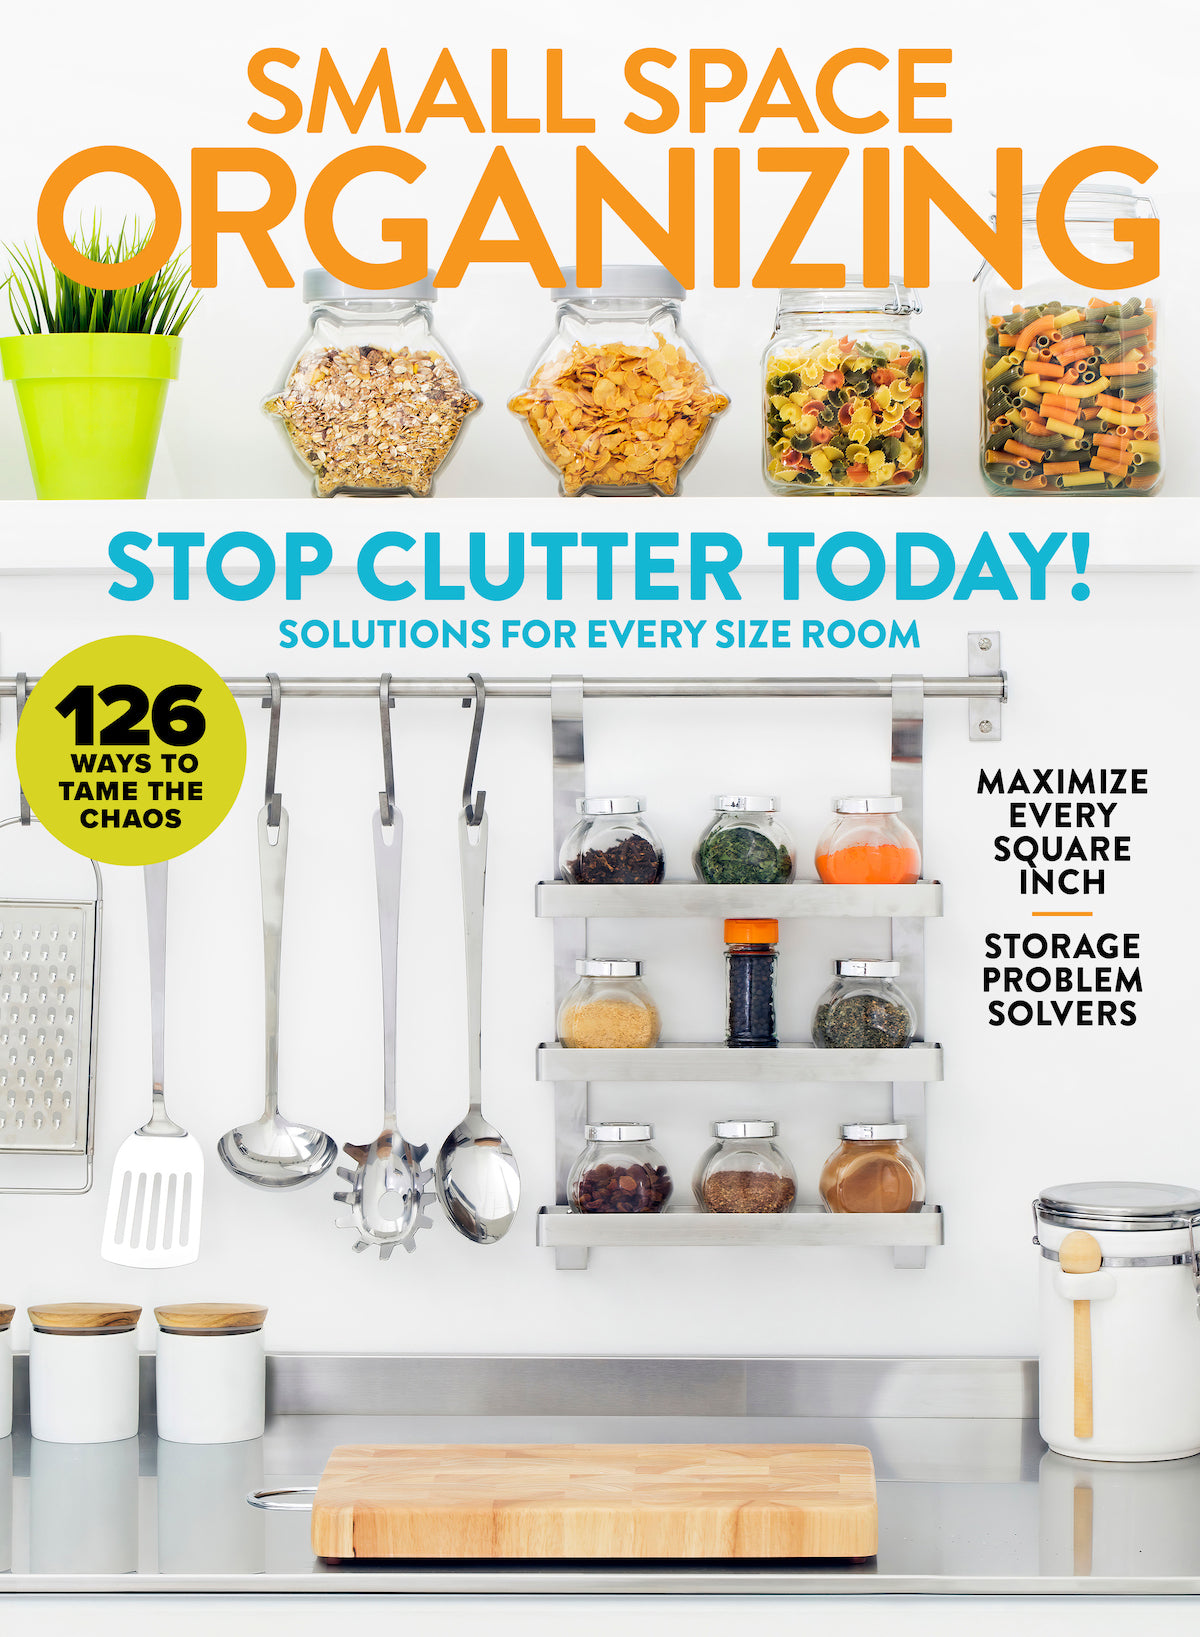 Small Space Organizing - Stop Clutter Today: 126 Solutions For